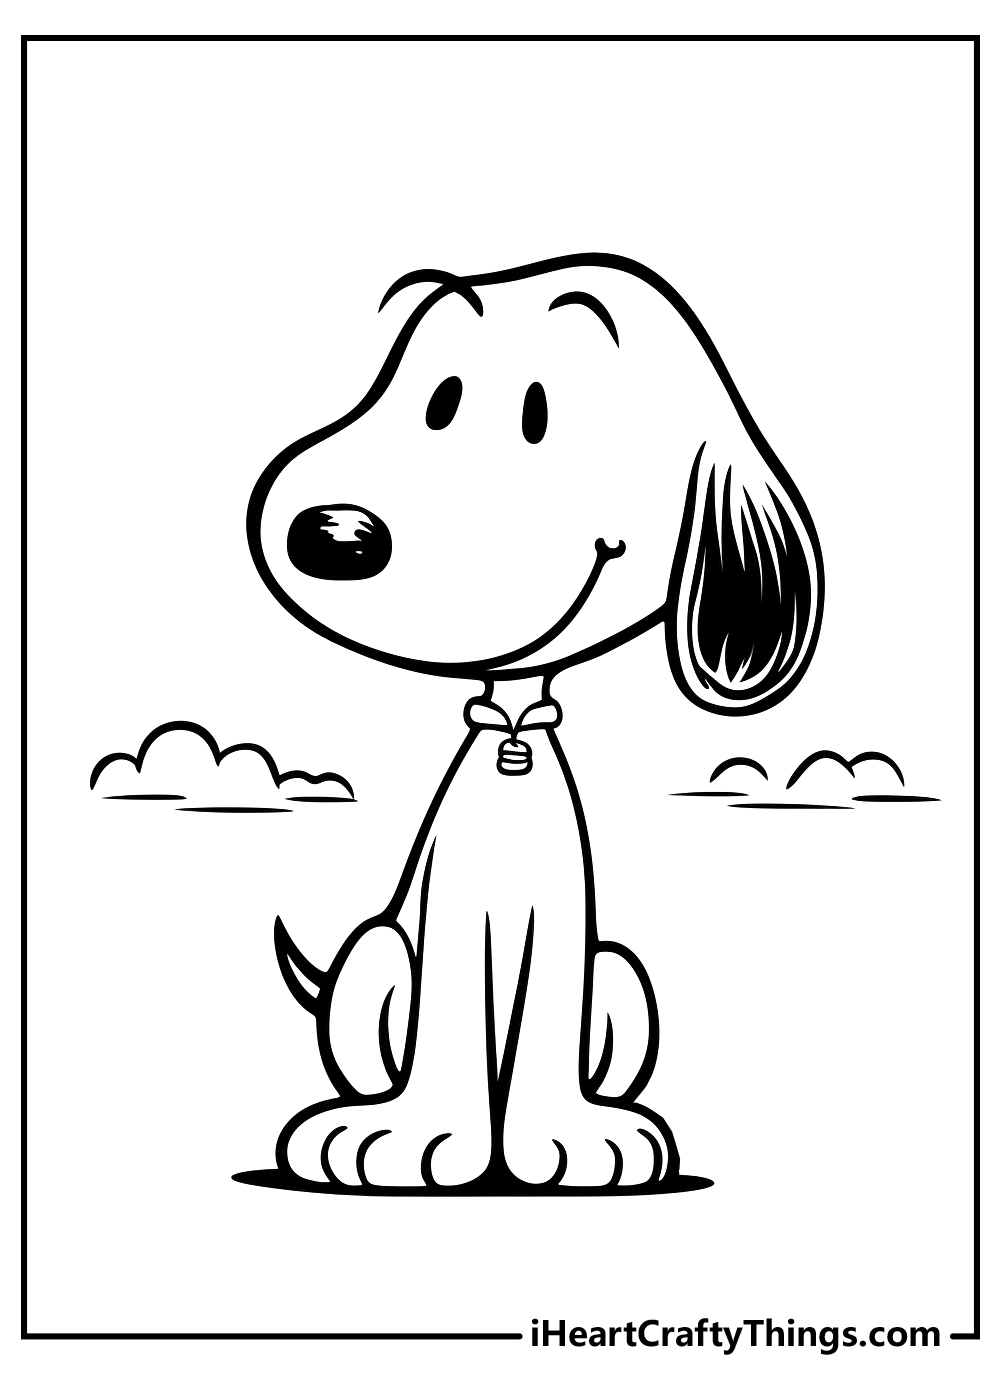 snoopy coloring sheet free download